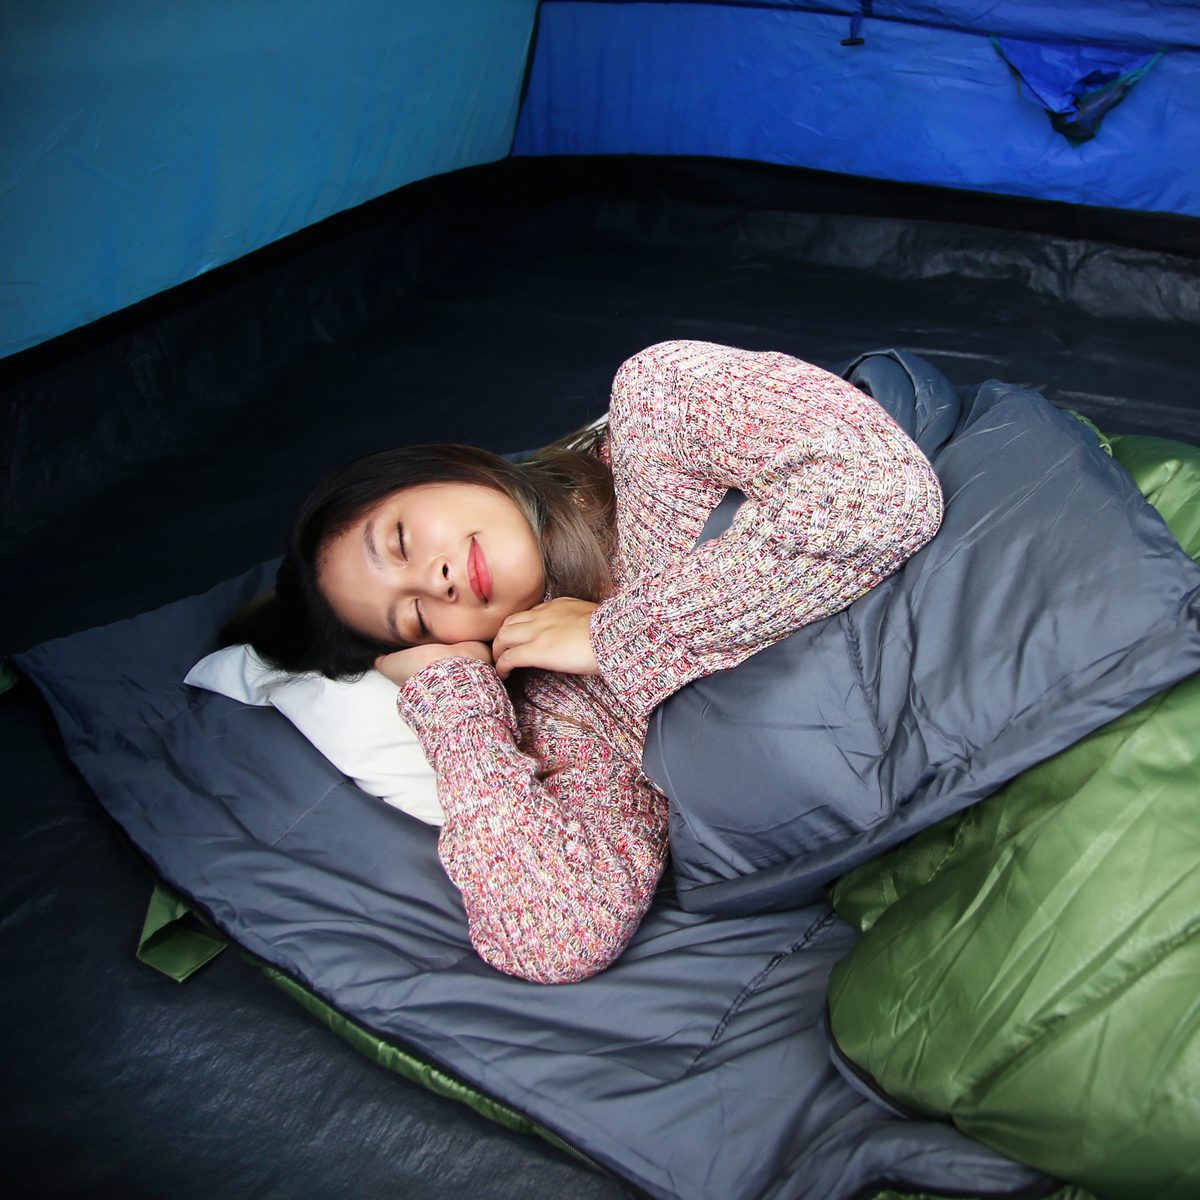 Woman sleeping in a Tent